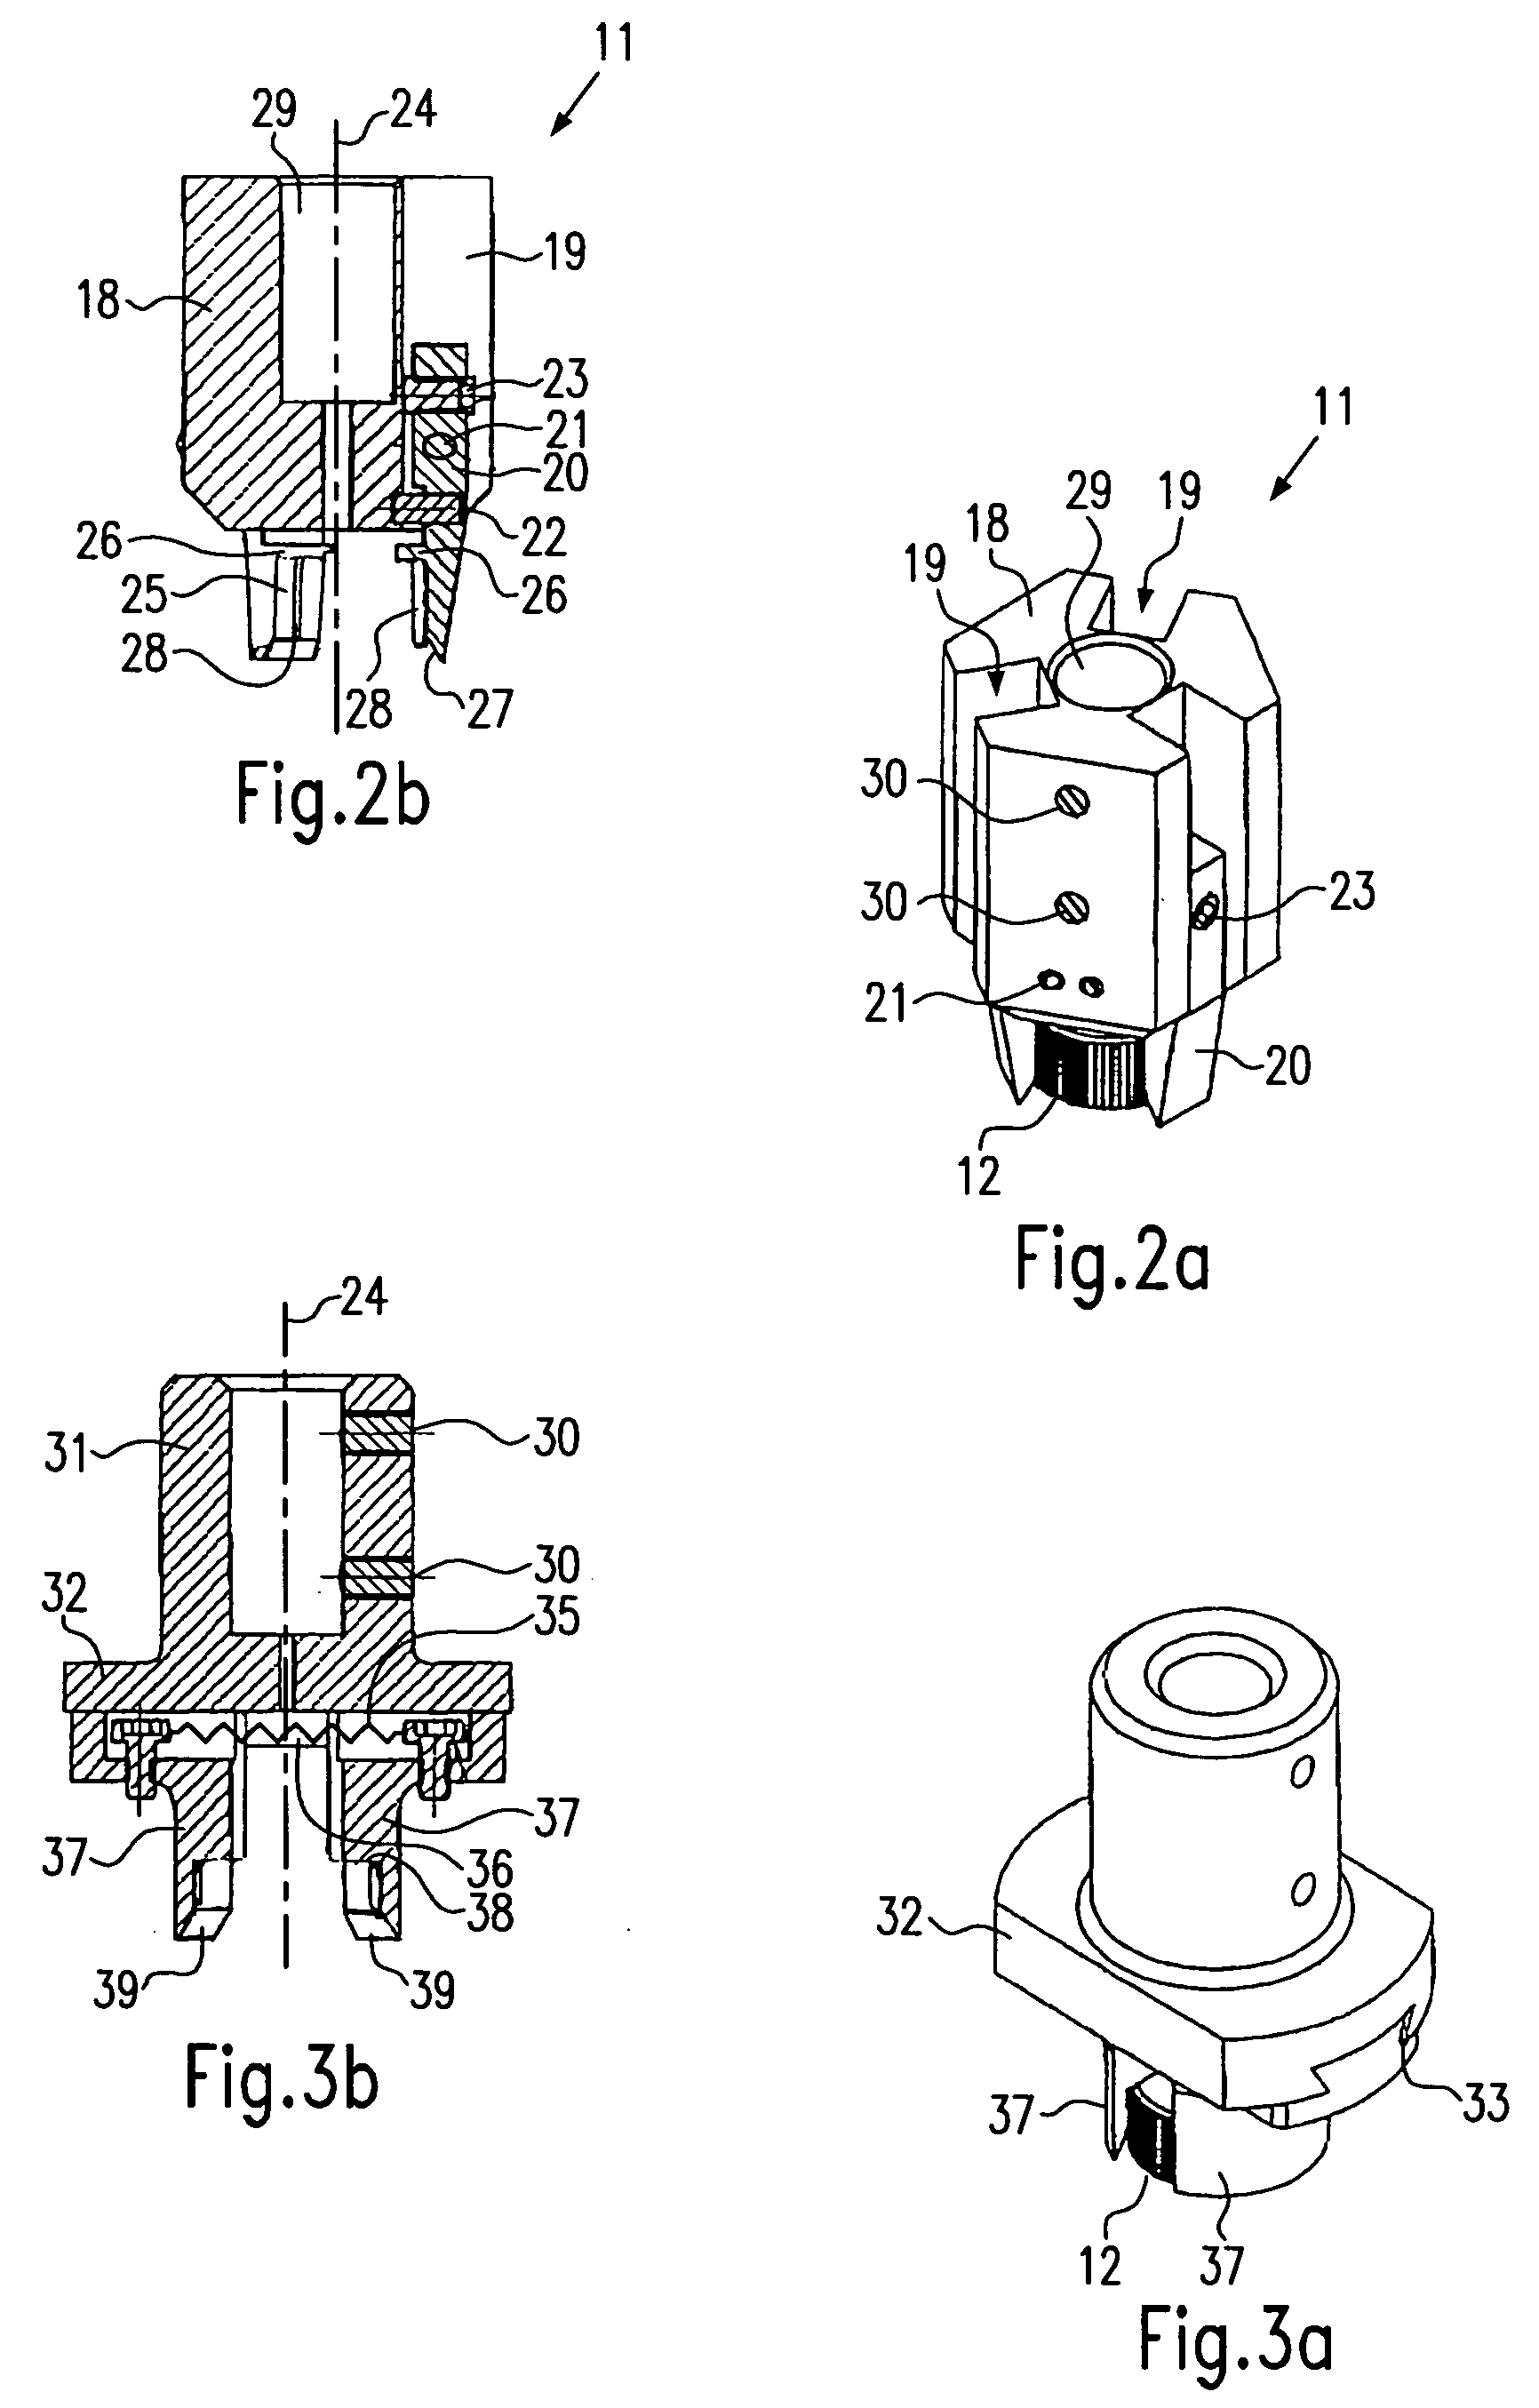 Device for the automatic opening and closing of reaction vessels